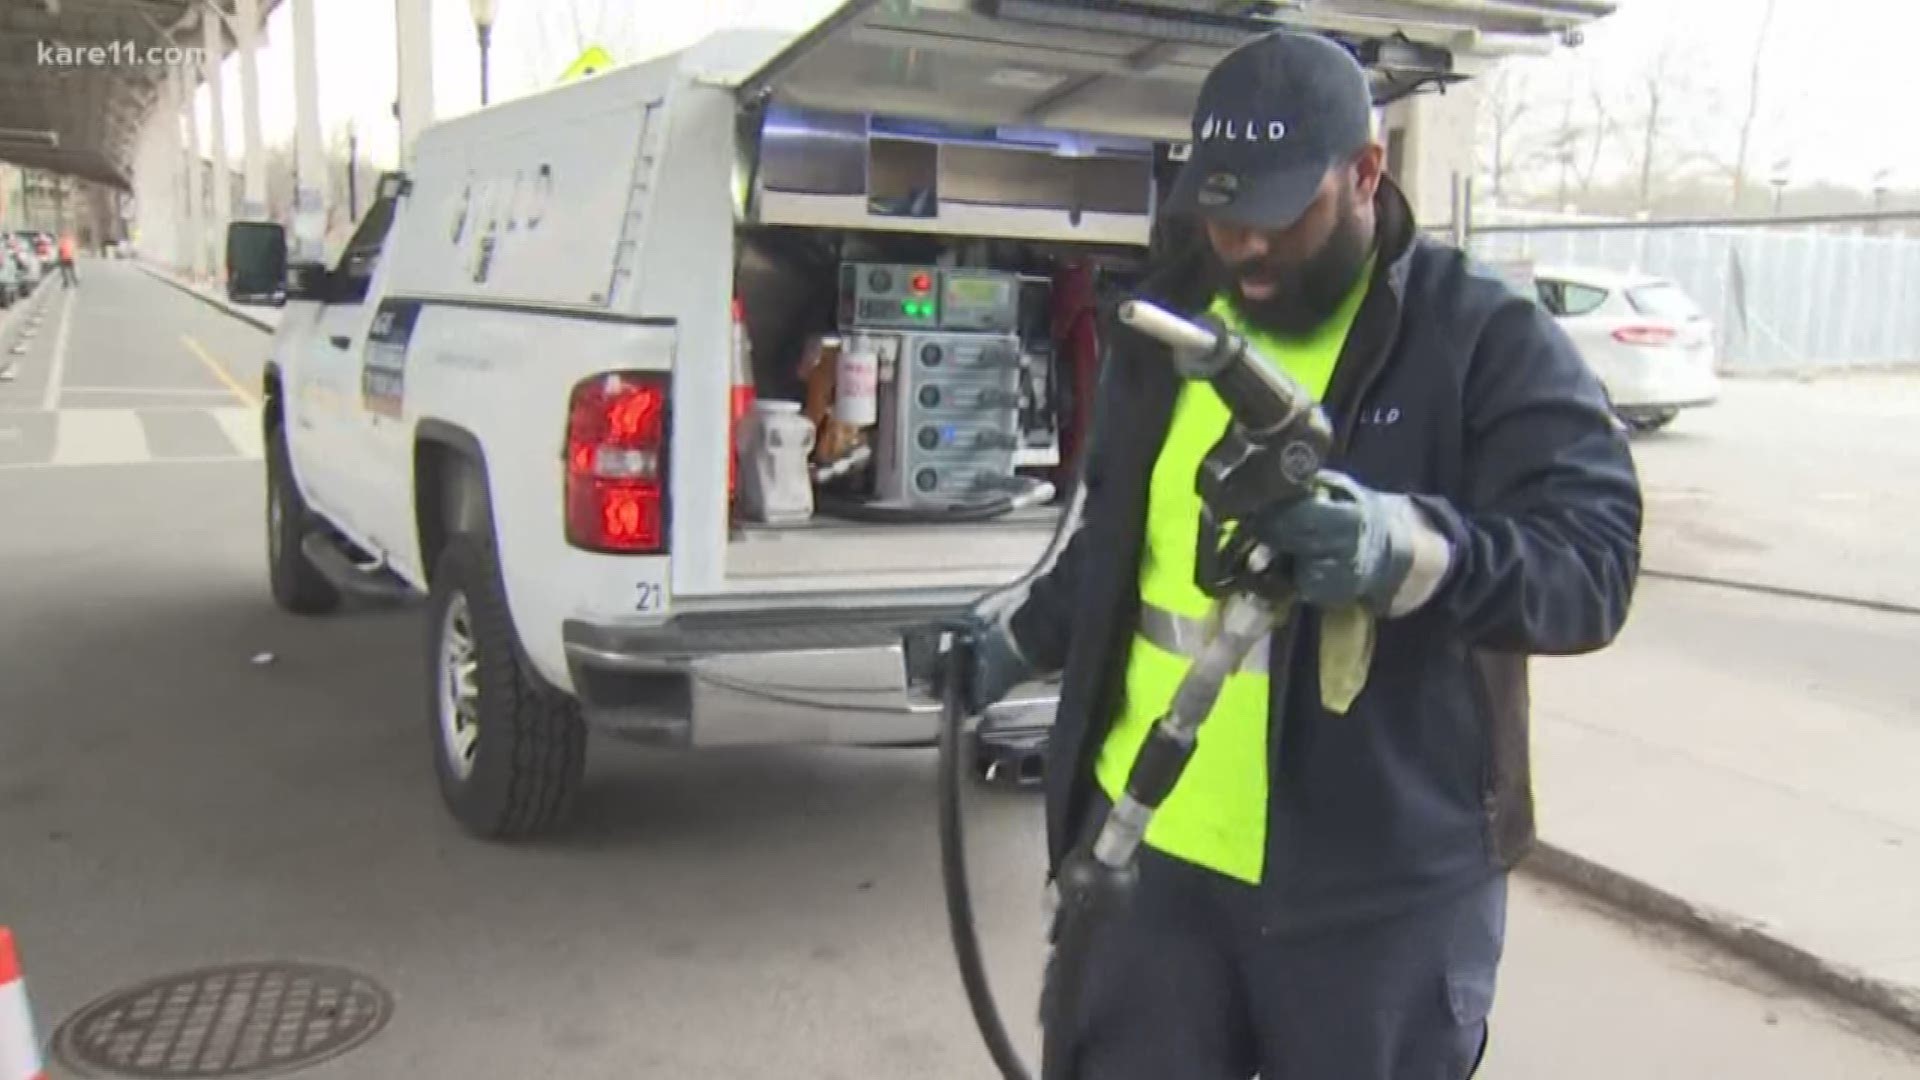 Filld, a mobile fueling service, is only available in a few cities in the U.S. and Canada, but has plans to expand. https://kare11.tv/2AF4MvU